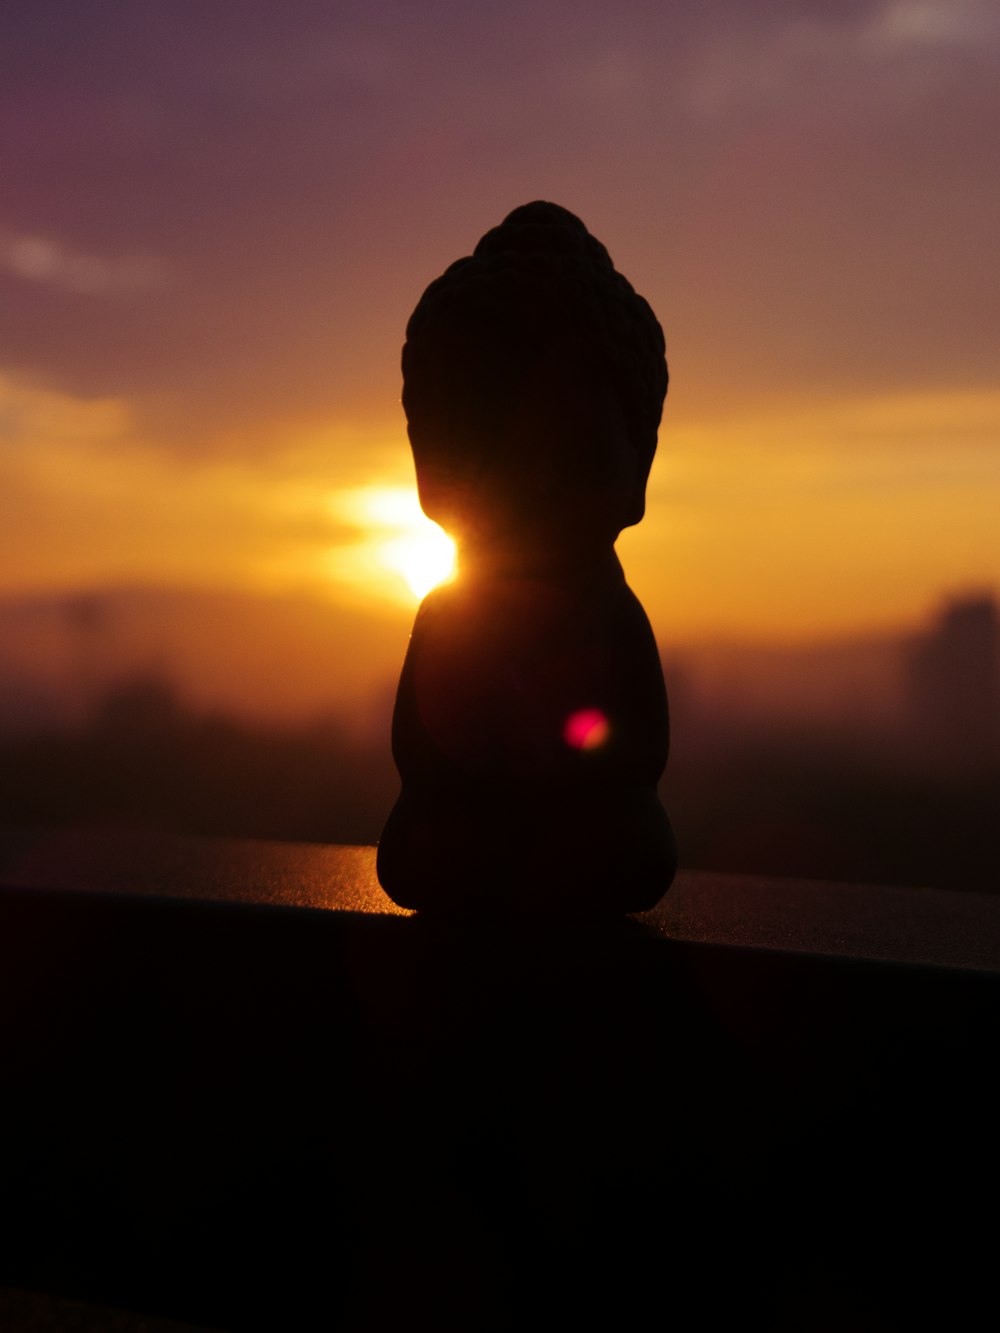 the sun is setting behind a statue of a person